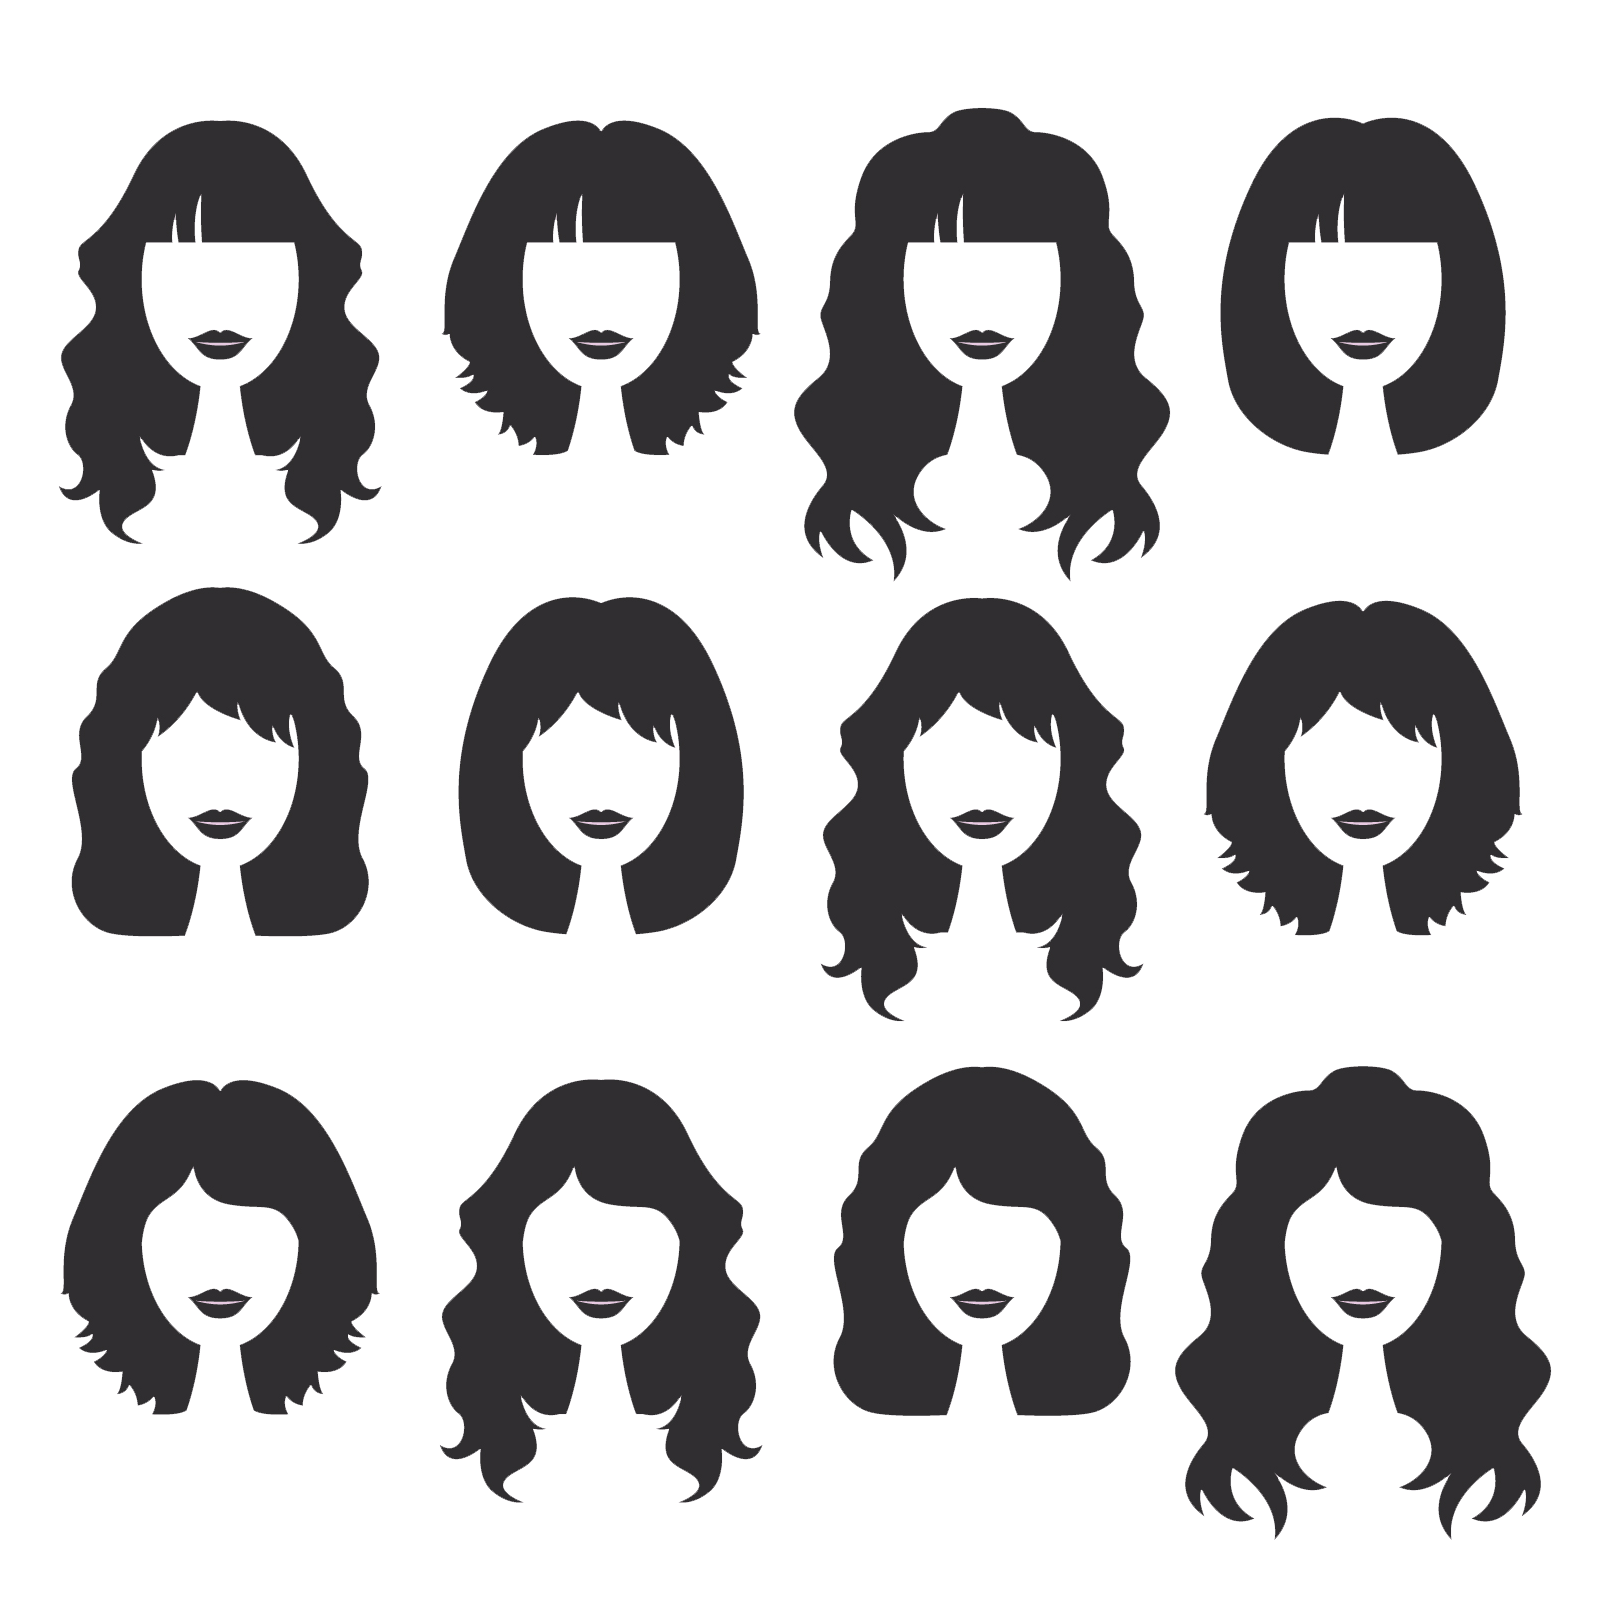 Hairstyle variety girls pull. Haircut clipart beauty parlour girl